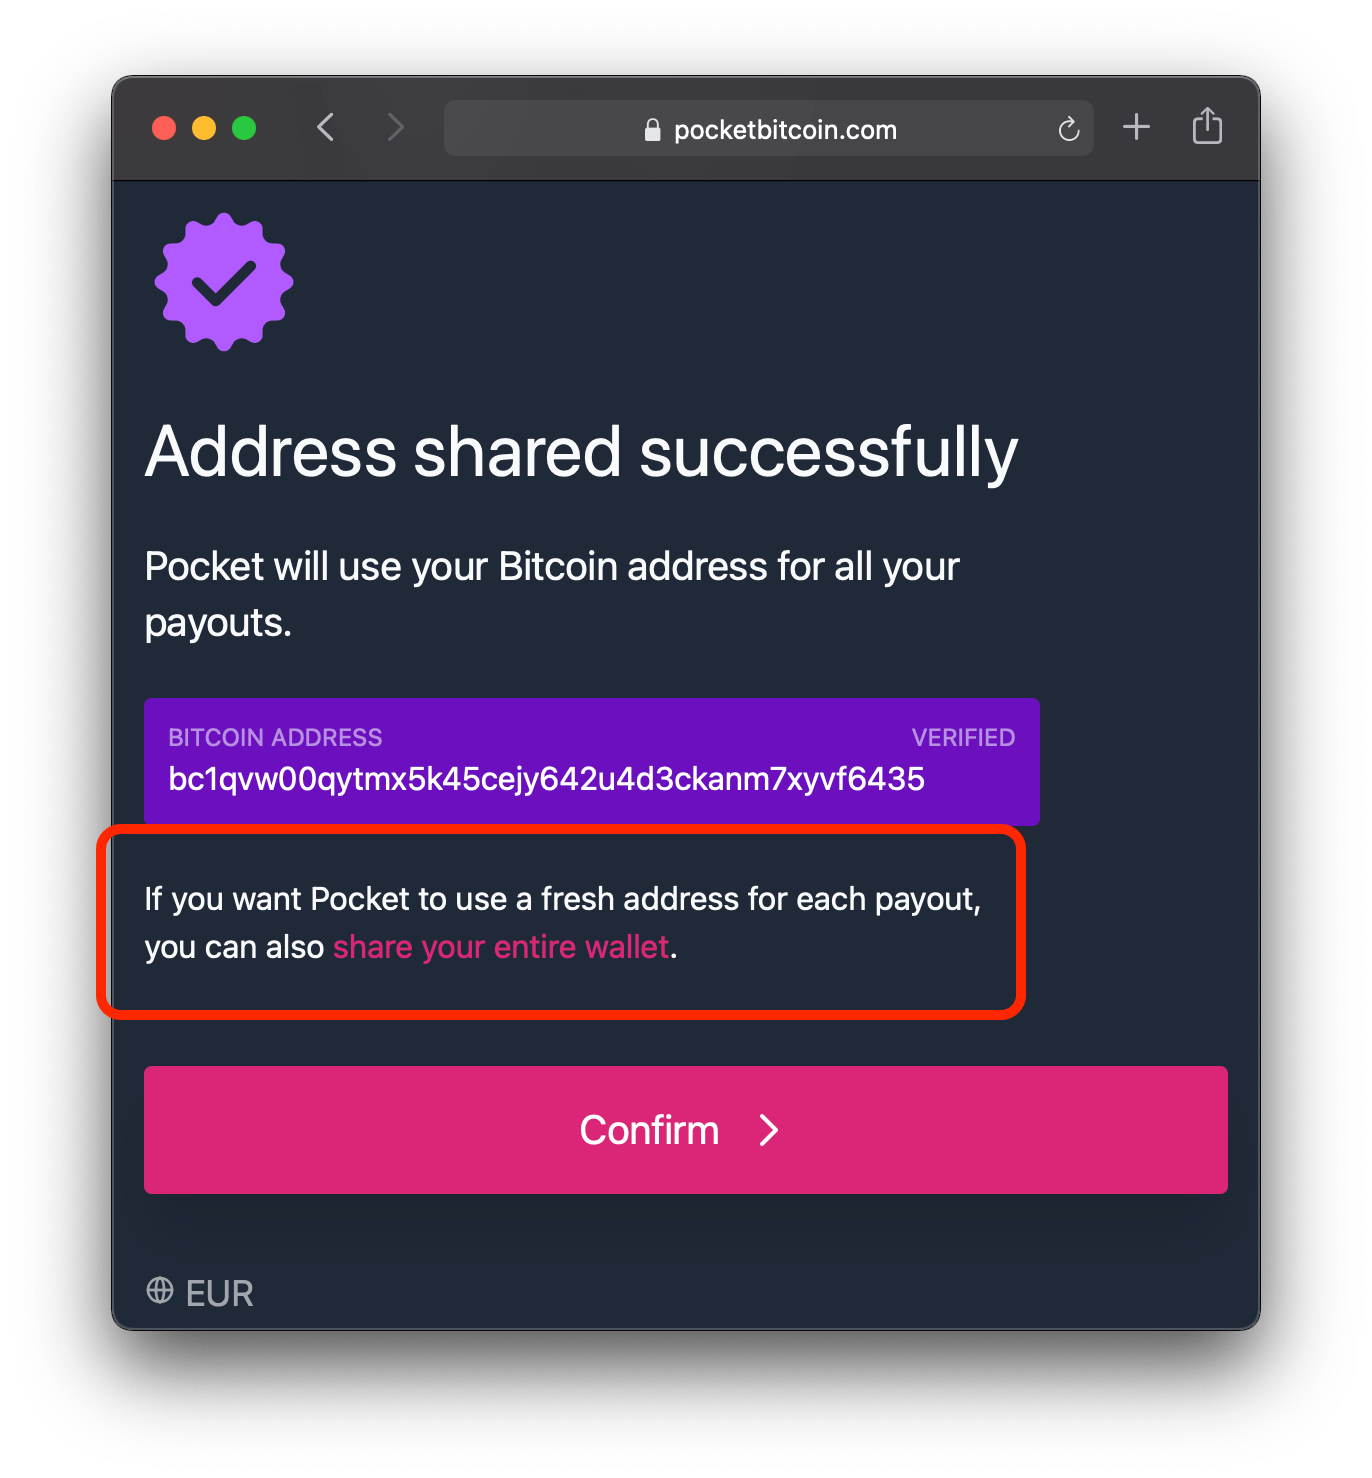 Screenshot of the option to share entire wallet on Pocket